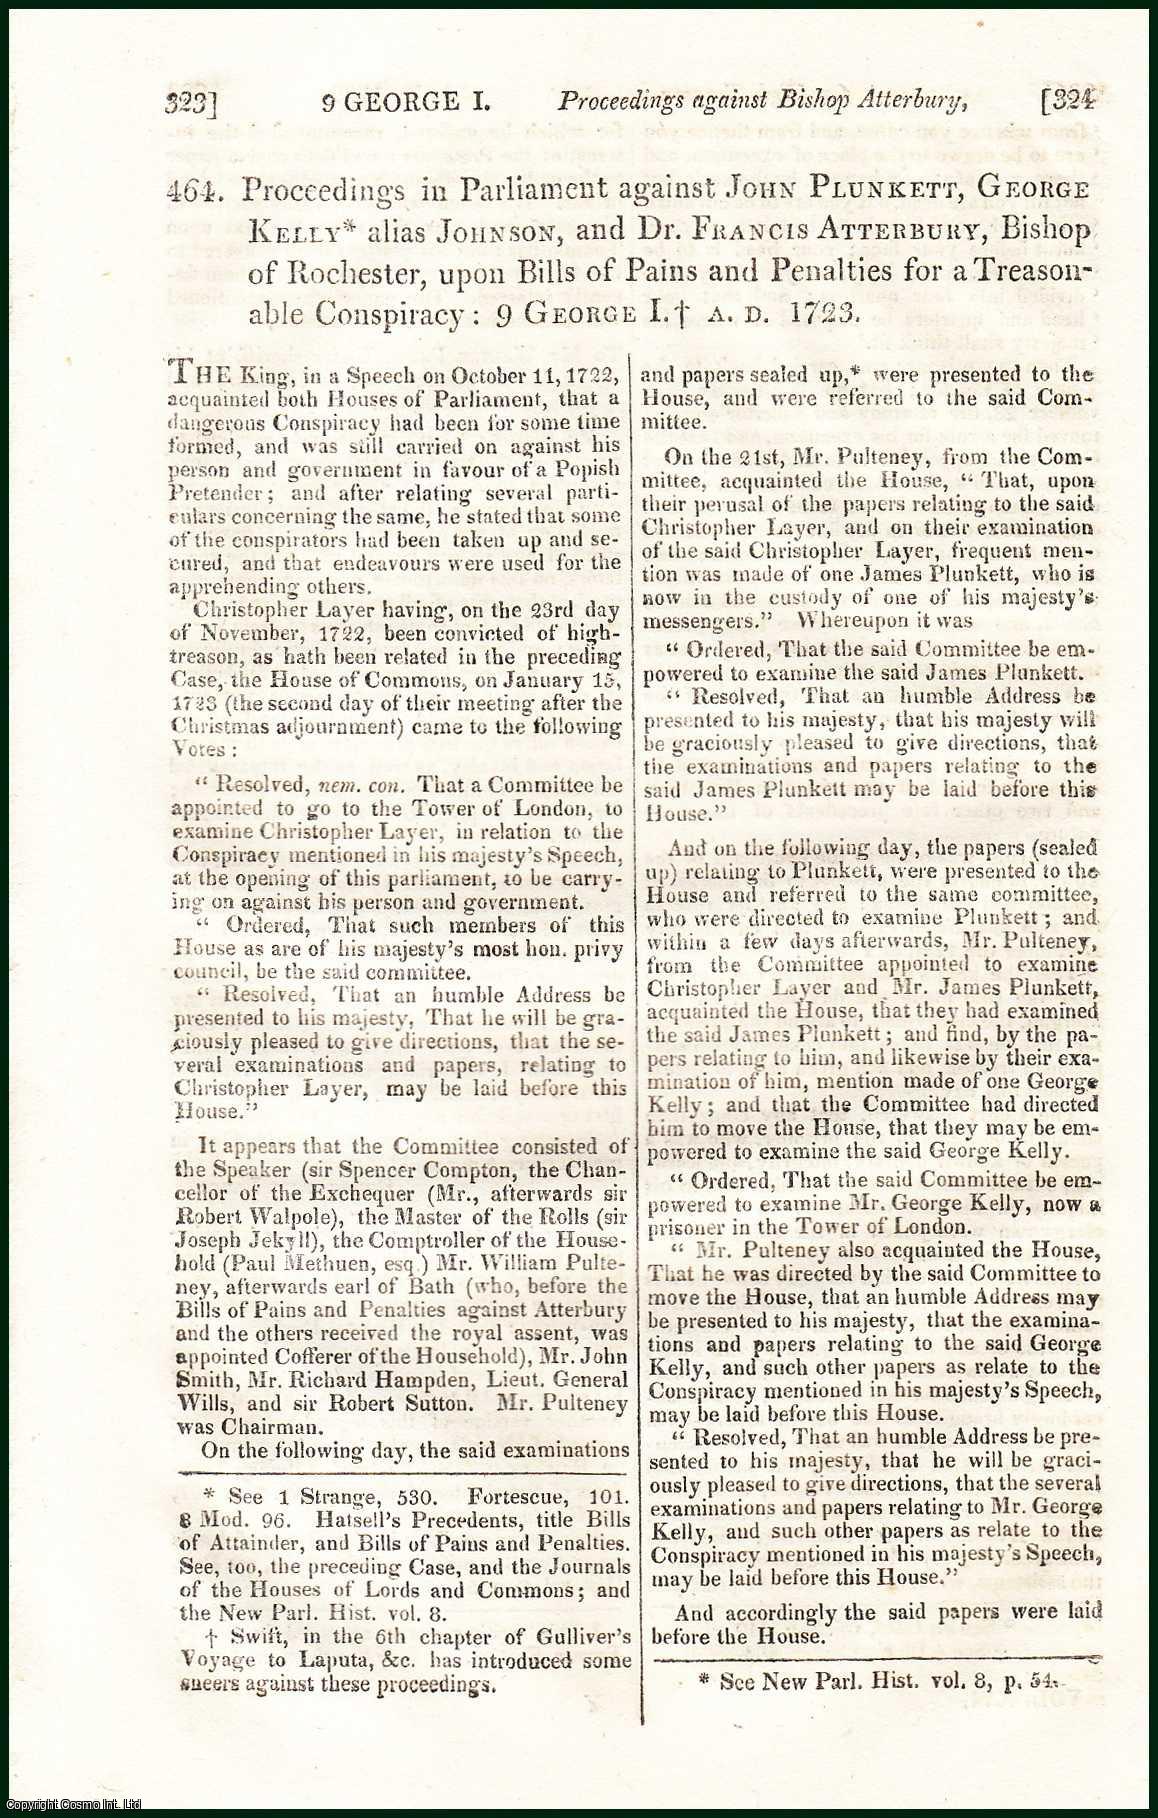 TRIAL - Proceedings in Parliament against John Plunkett, George Kelly alias Johnson, and Dr. Francis Atterbury, Bishop of Rochester, upon Bills of Pains and Penalties for a Treasonable Conspiracy. AD 1723. An uncommon original article from the Collected State Trials, 1812.